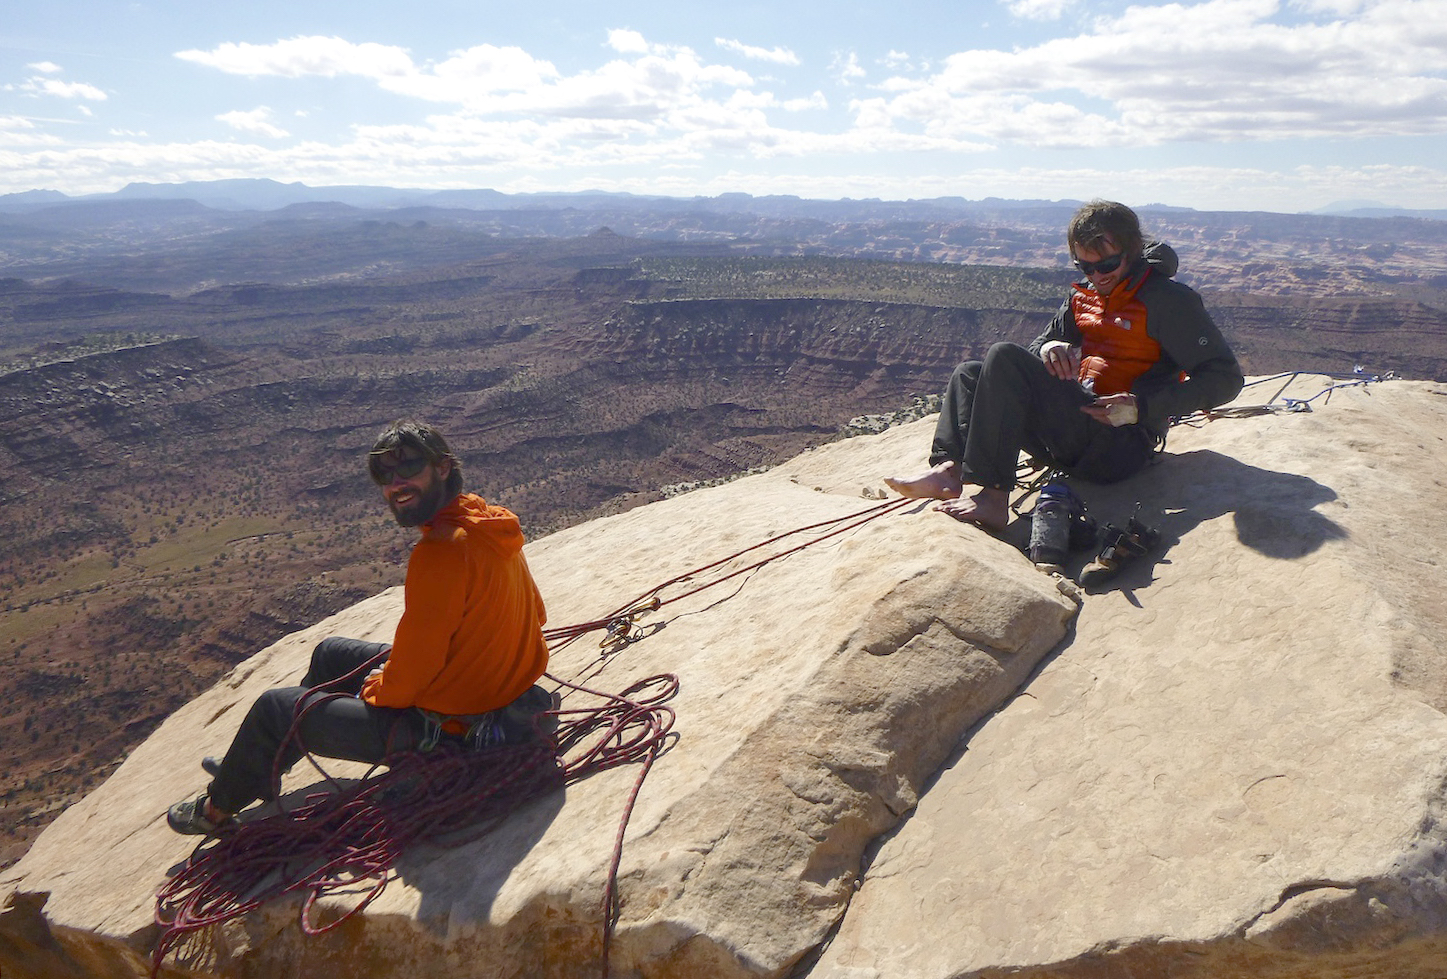 Nathan Martinez and Steve Dilk sit atop North Six Shooter in Indian Creek, Utah, in 2013. The area is now included in Bears Ears National Monument. Canyonlands National Park is in the background. [Photo] Derek Franz